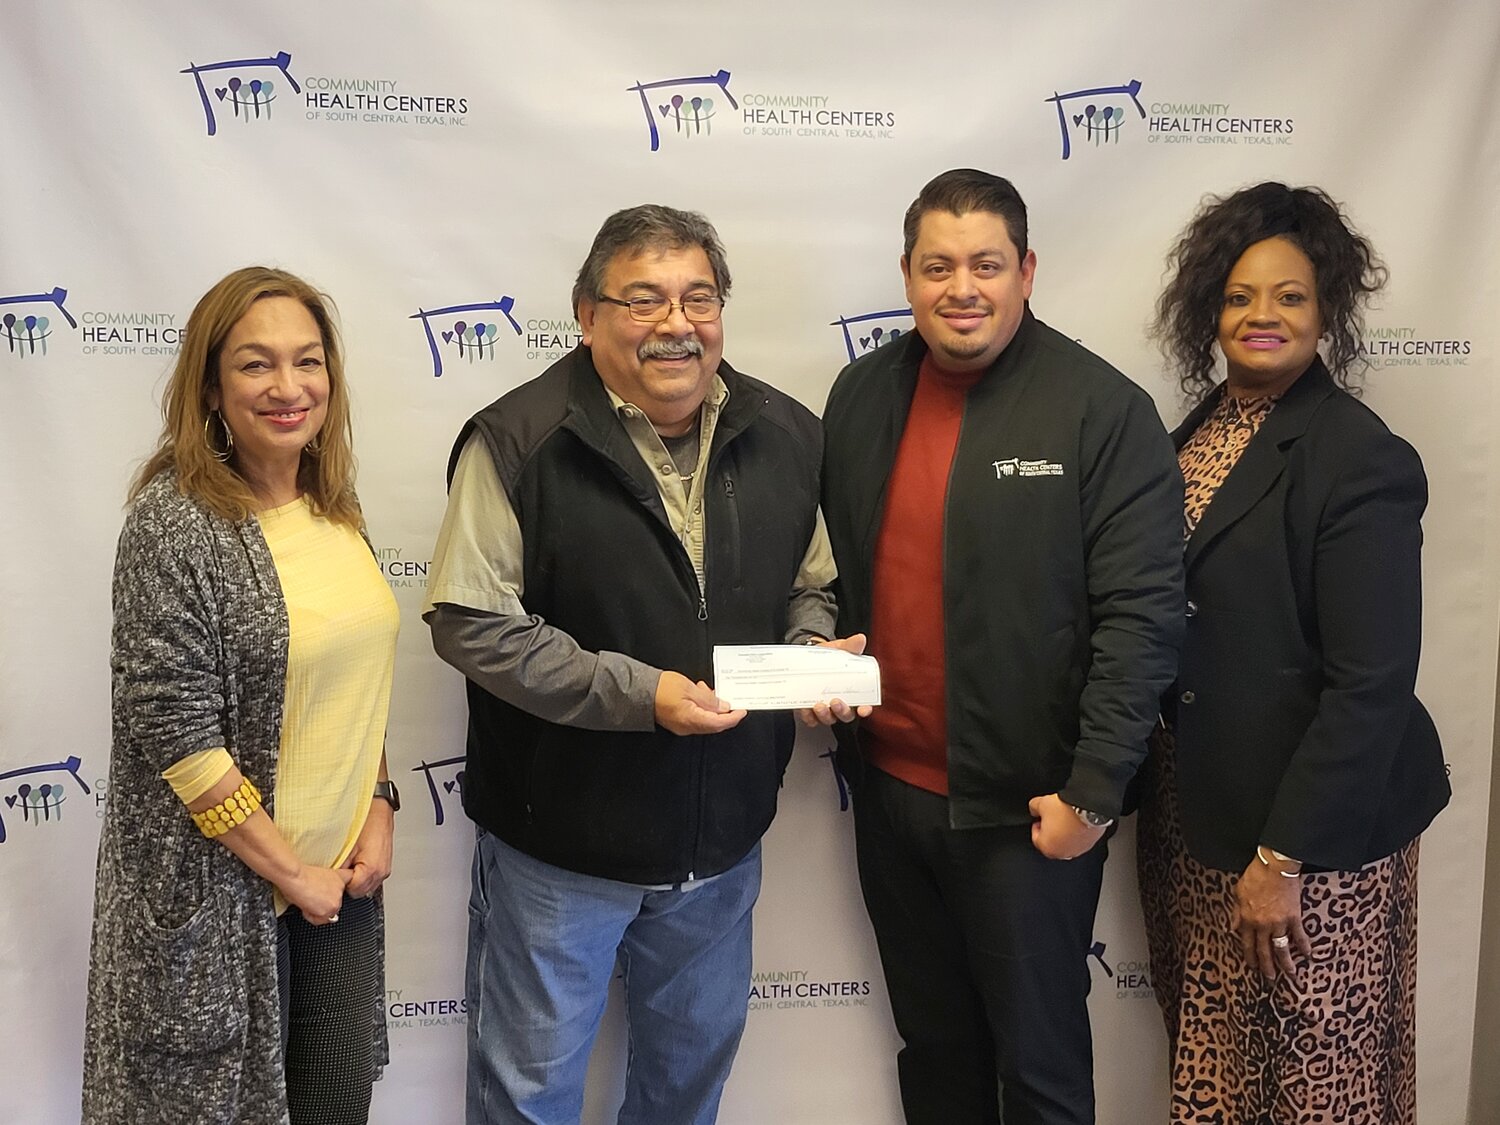 Carlos Camarillo (second from left), chairman of the Gonzales Elks Lodge No. 2314 Board of Directors, presents a $2,000 check to Debbie Marshall, Rafael De La Paz and Sharon Smith of the Community Health Centers of South Central Texas Inc. to help fund the organization’s first community baby shower in Gonzales County.